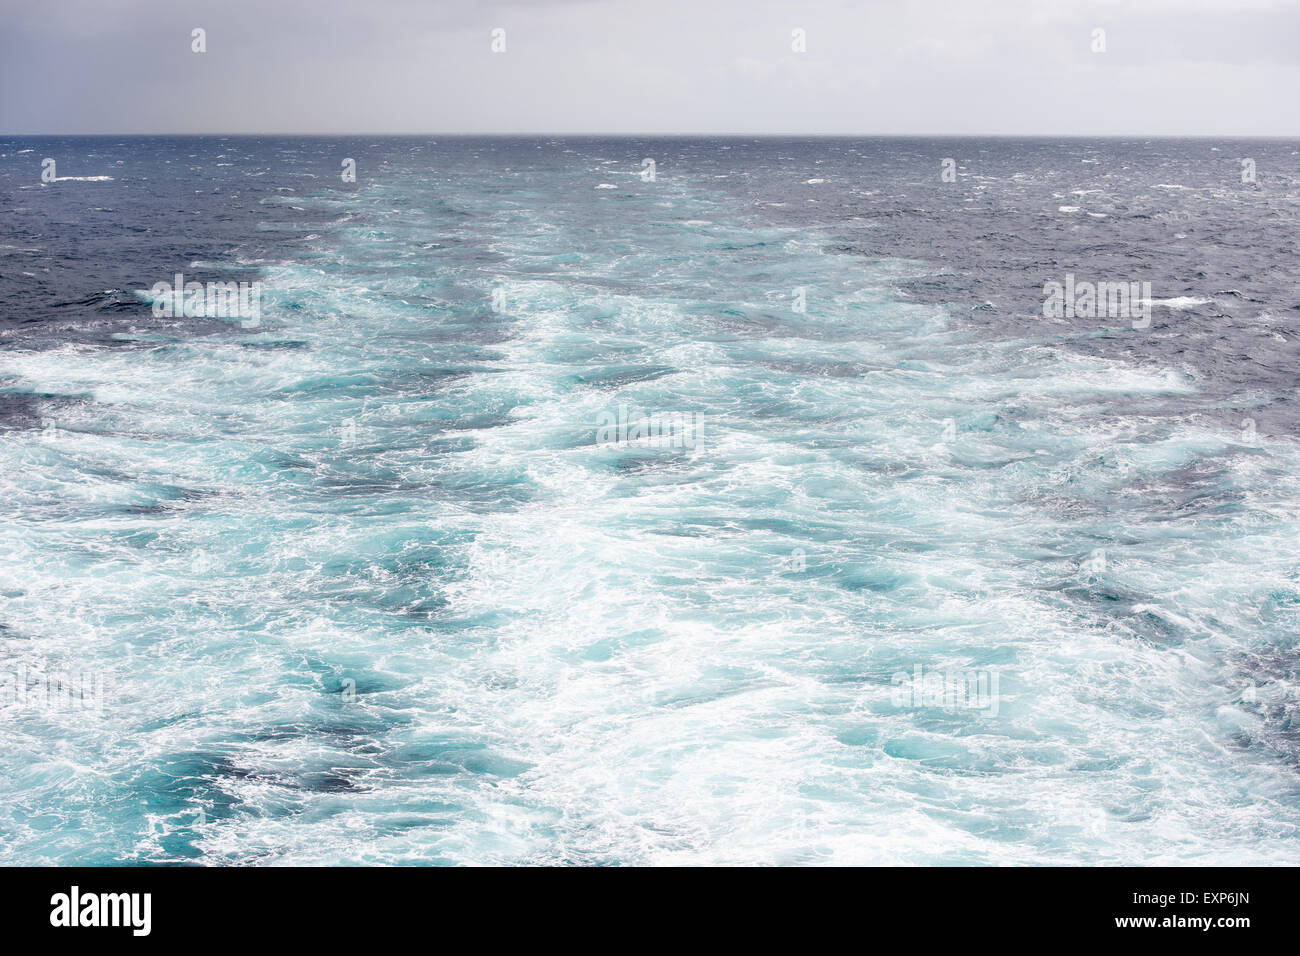 Wake of a large ship on the North Atlantic Ocean Stock Photo